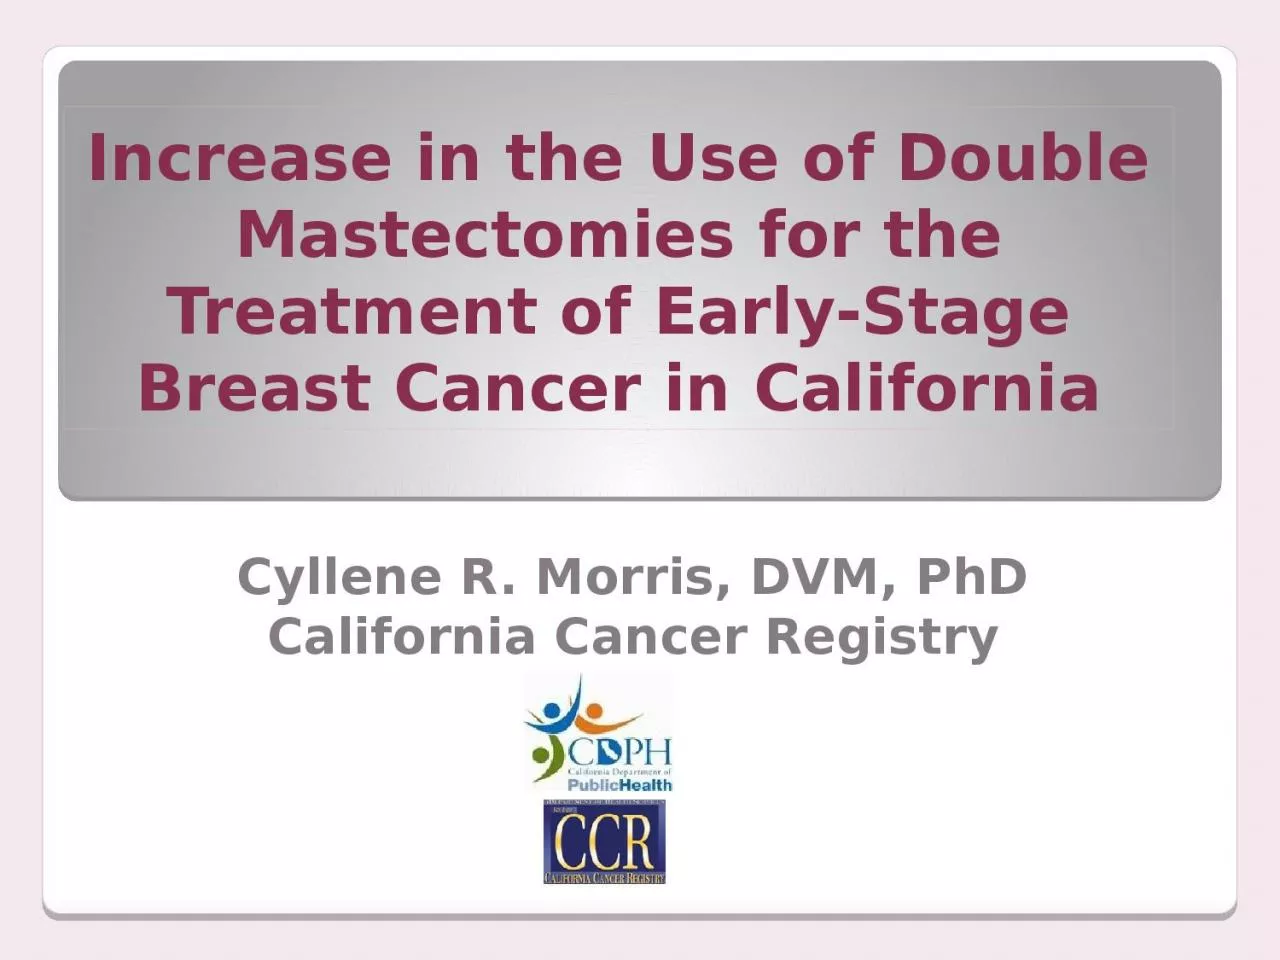 Increase in the Use of Double Mastectomies for the Treatment of Early-Stage Breast Cancer